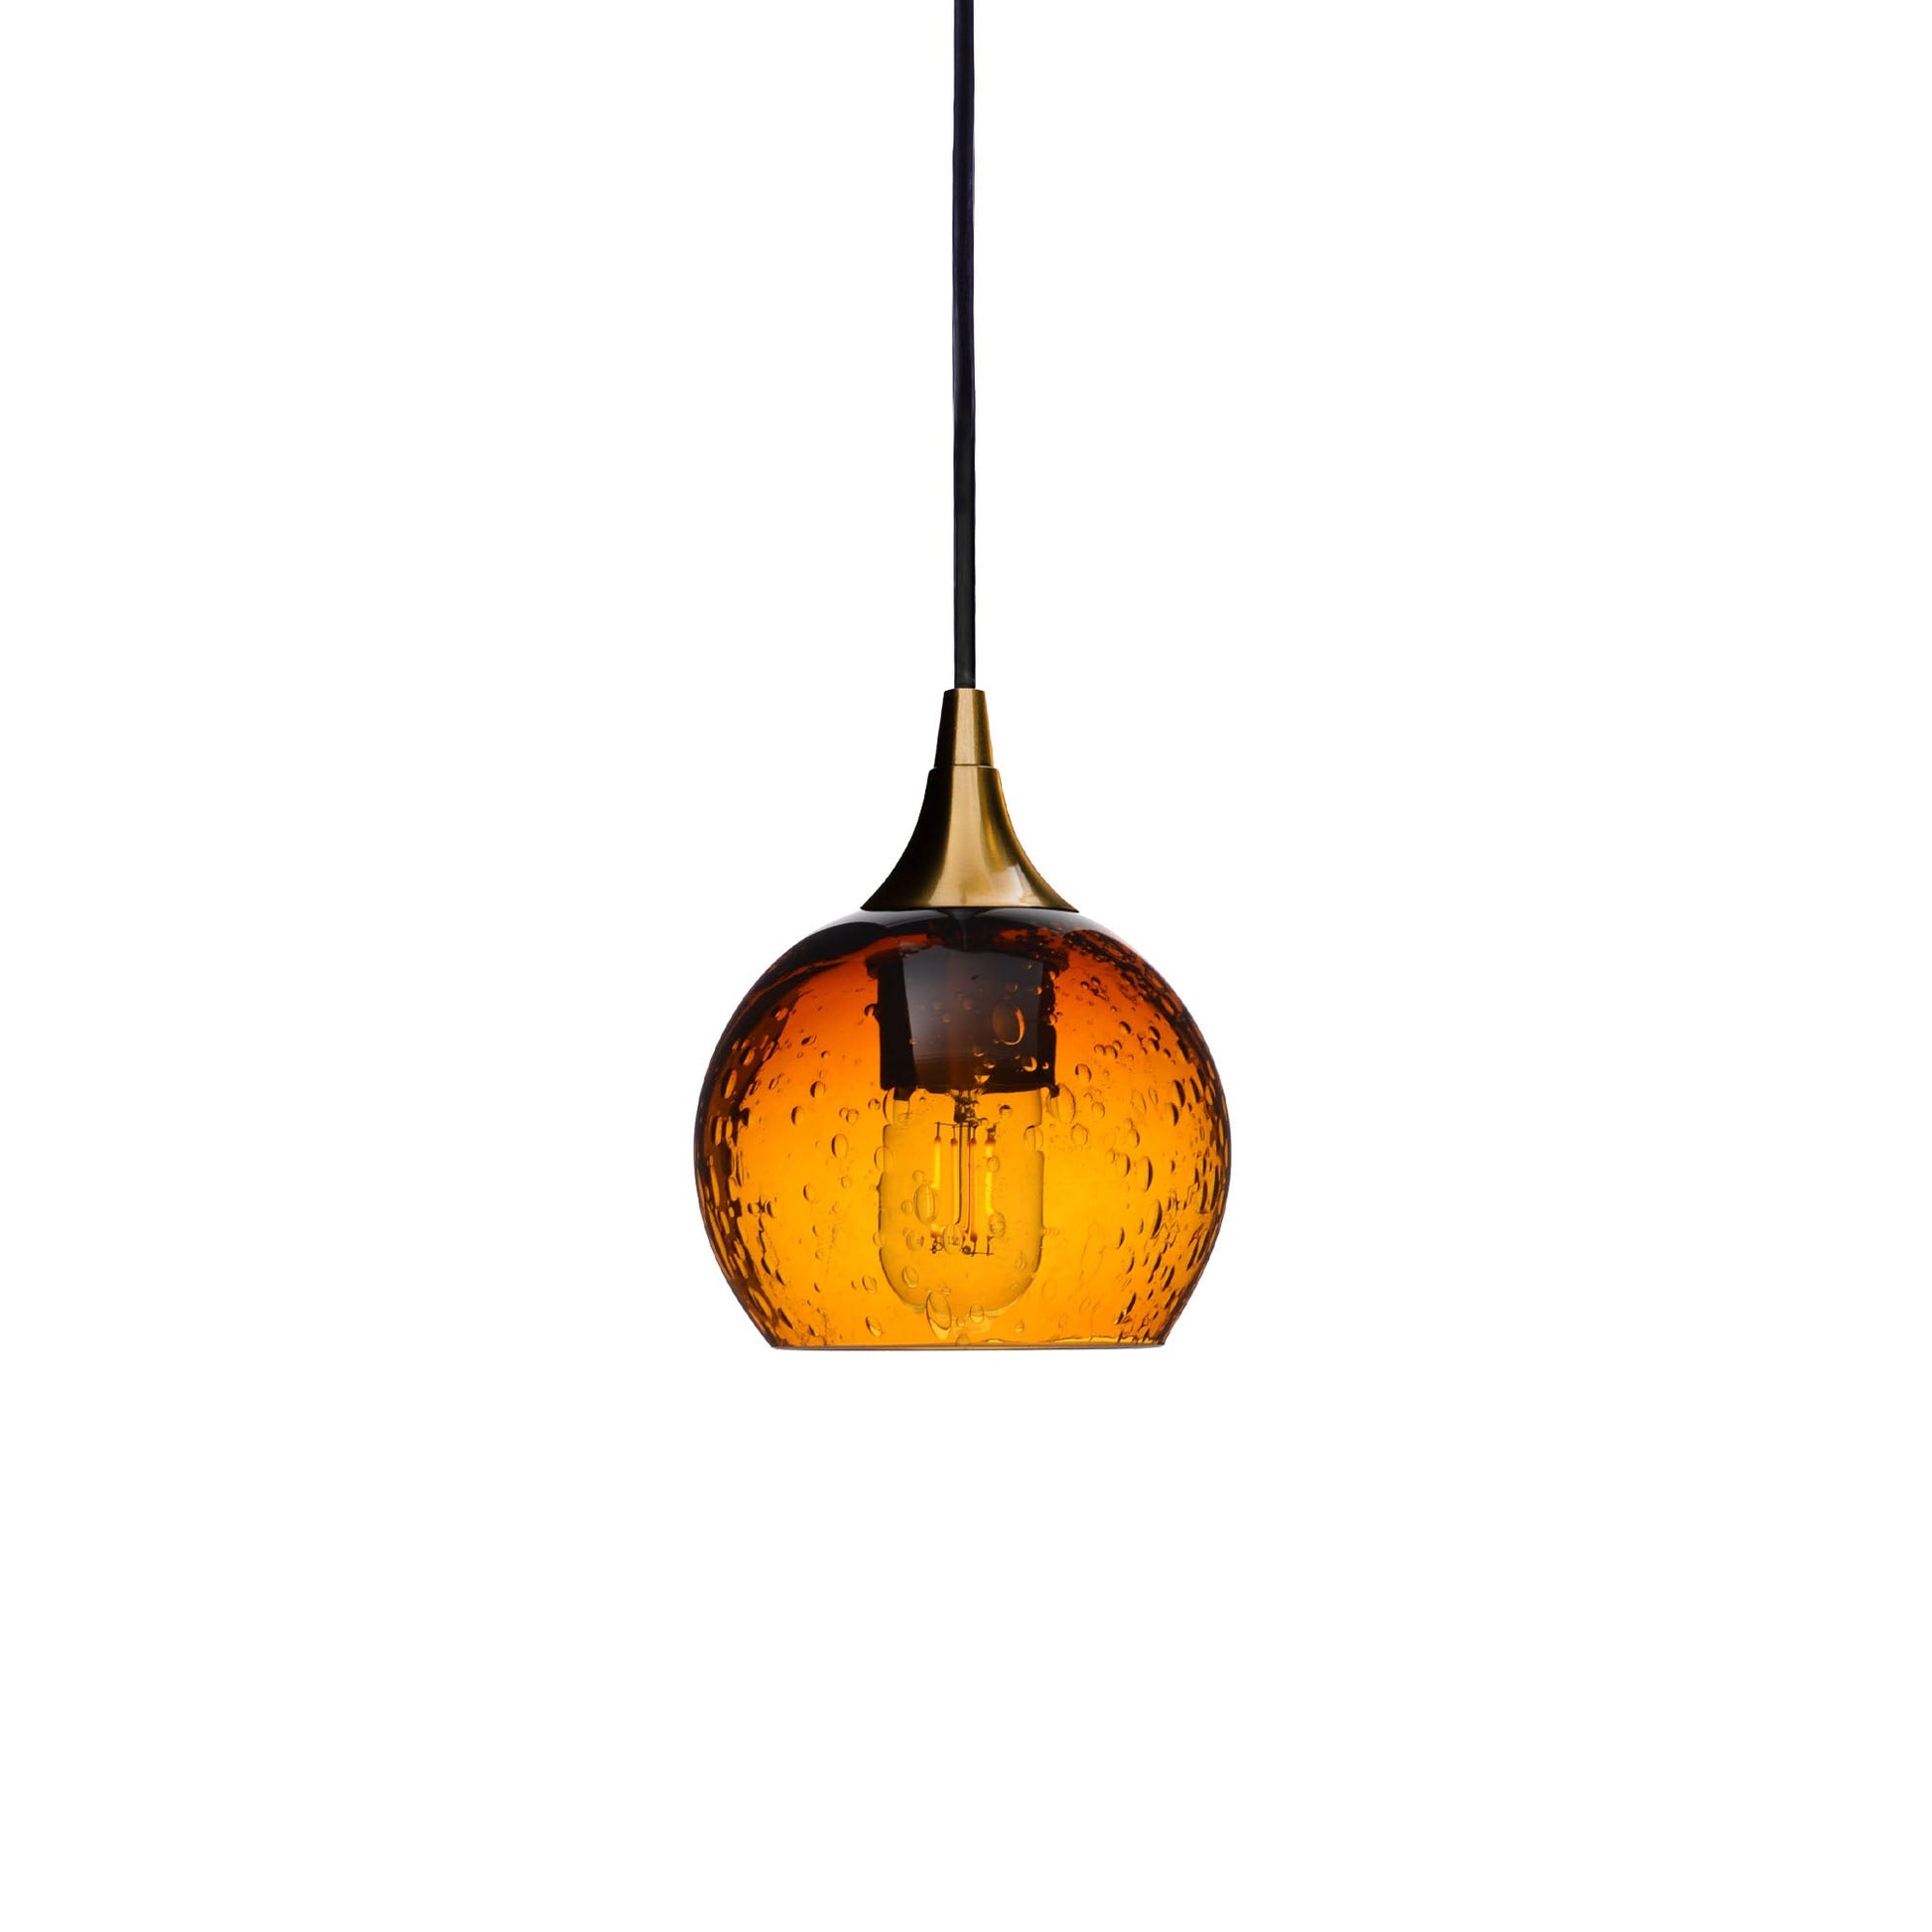 763 Lunar: Single Pendant Light-Glass-Bicycle Glass Co - Hotshop-Harvest Gold-Polished Brass-Bicycle Glass Co